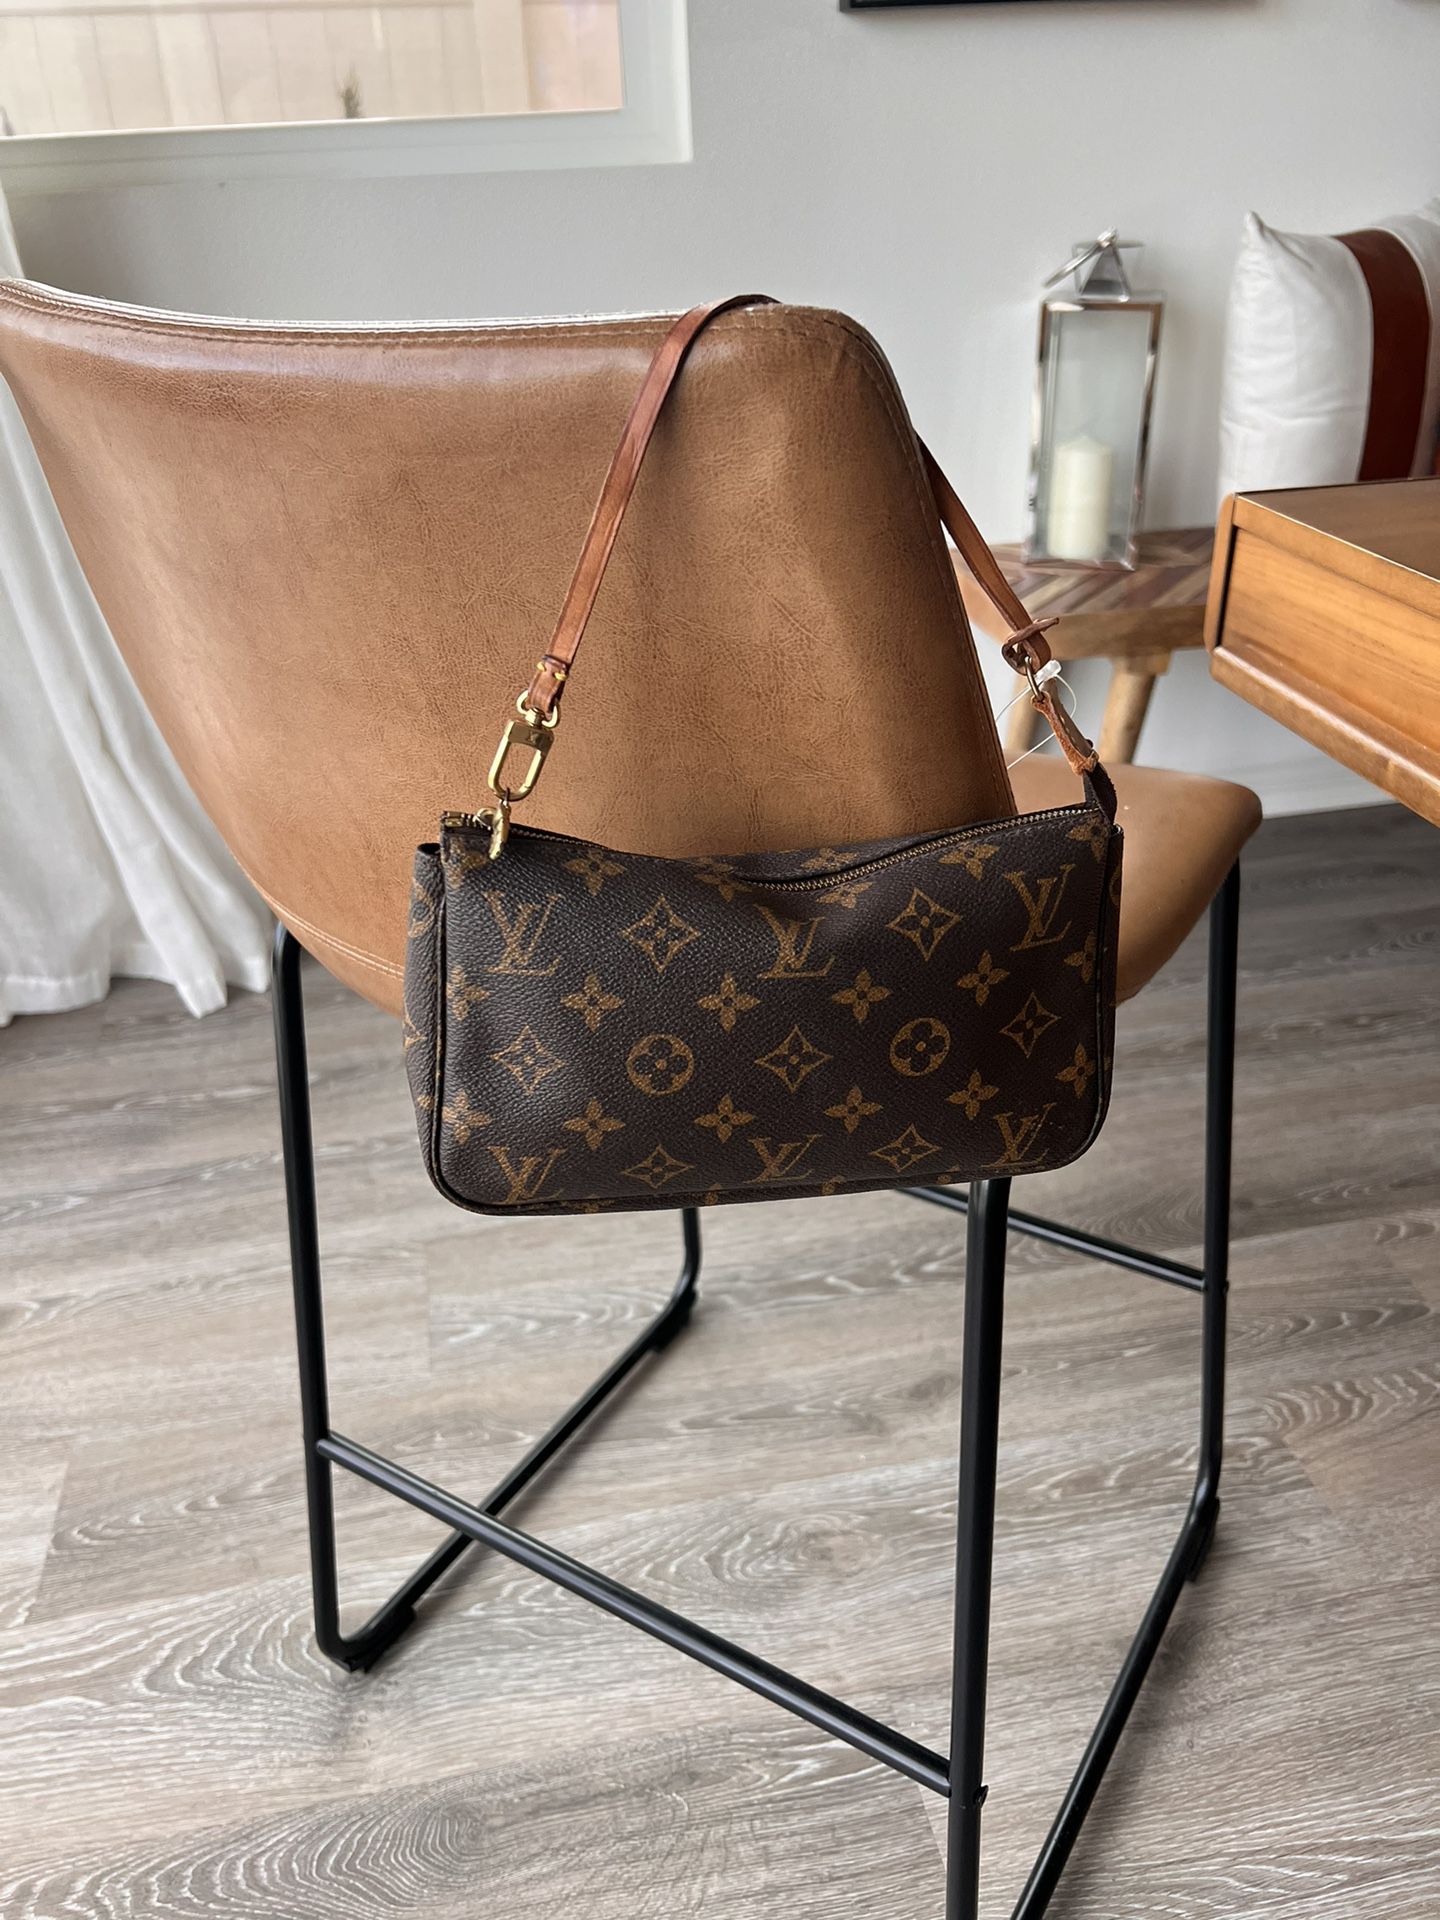 Authentic Louis Vuitton Red Pochette Bag NO LOW BALLERS, NEW for Sale in  Ontario, CA - OfferUp